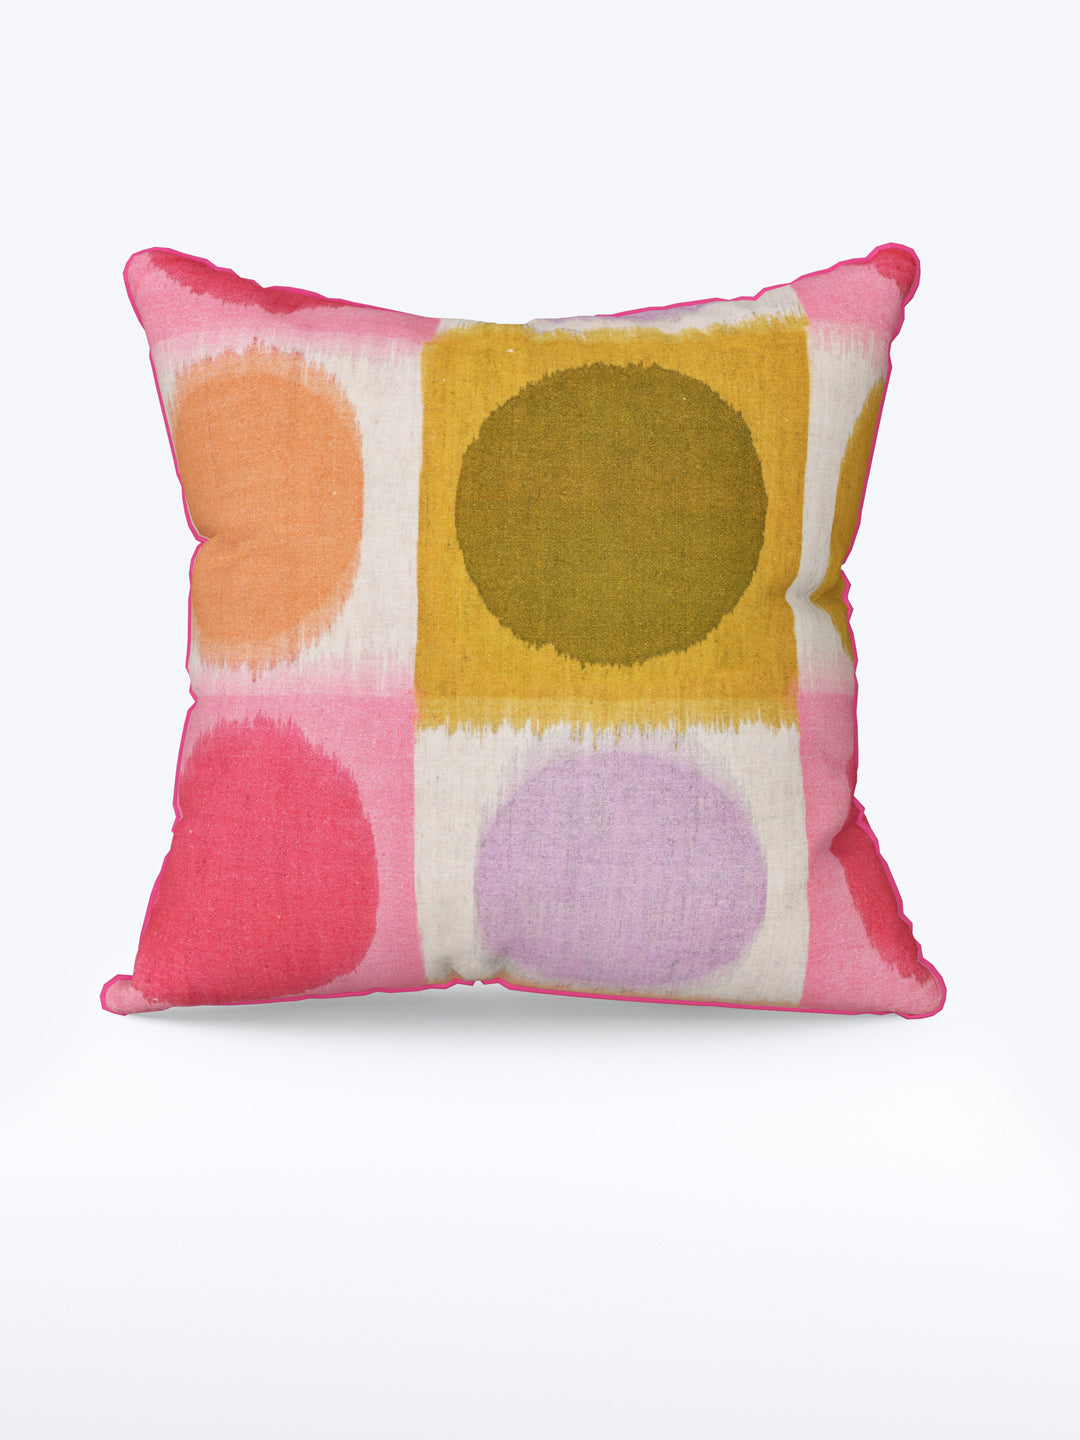 Cushion Cover Set Of 5; Multicolor Circles